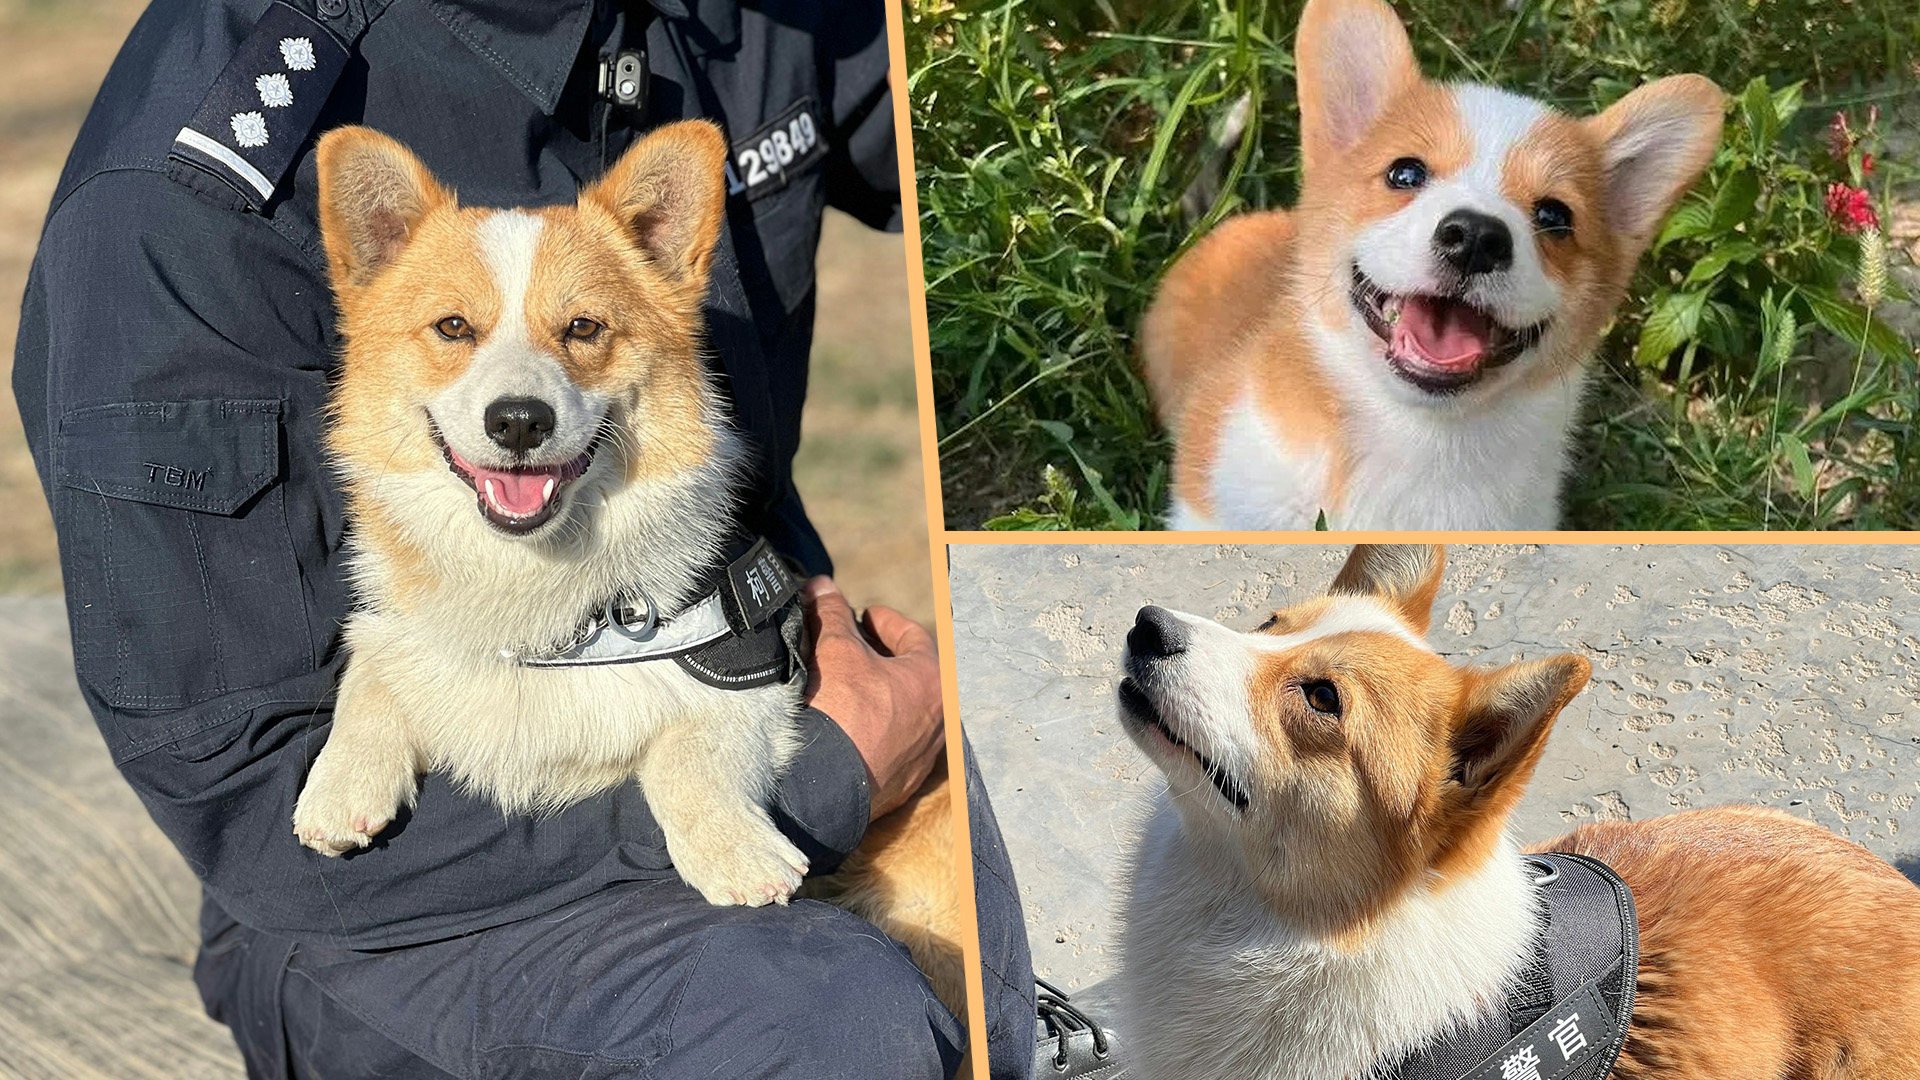 China’s first Corgi police dog has made its public debut and has been hailed for its explosive detection work due to its ability to work well in tight spaces. Photo: SCMP composite/Weibo